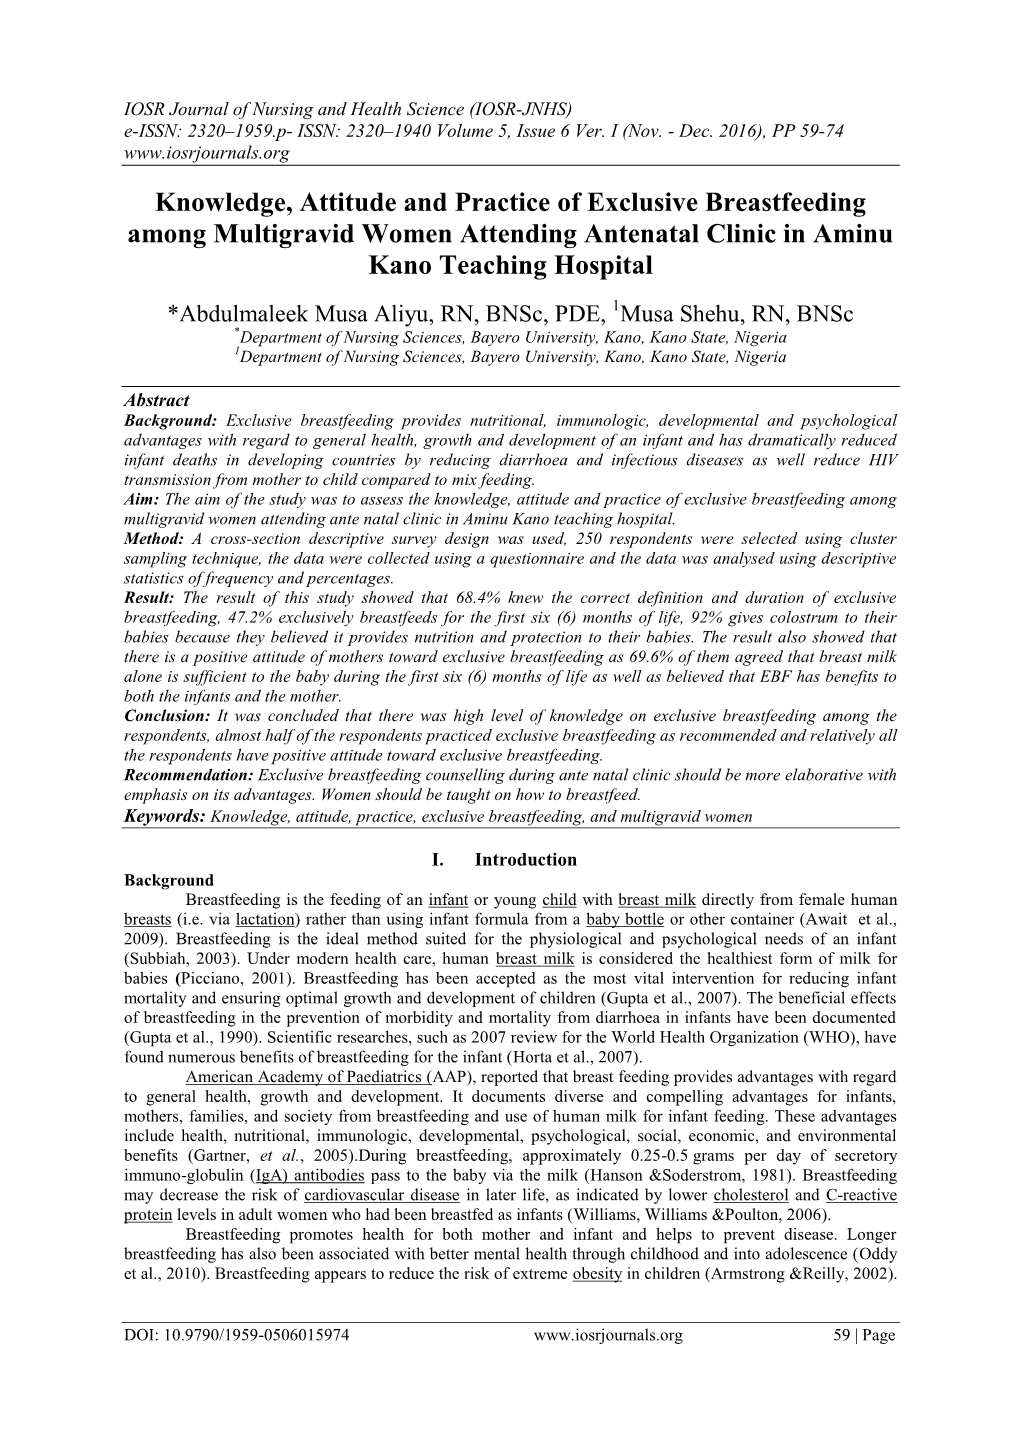 Knowledge, Attitude and Practice of Exclusive Breastfeeding Among Multigravid Women Attending Antenatal Clinic in Aminu Kano Teaching Hospital